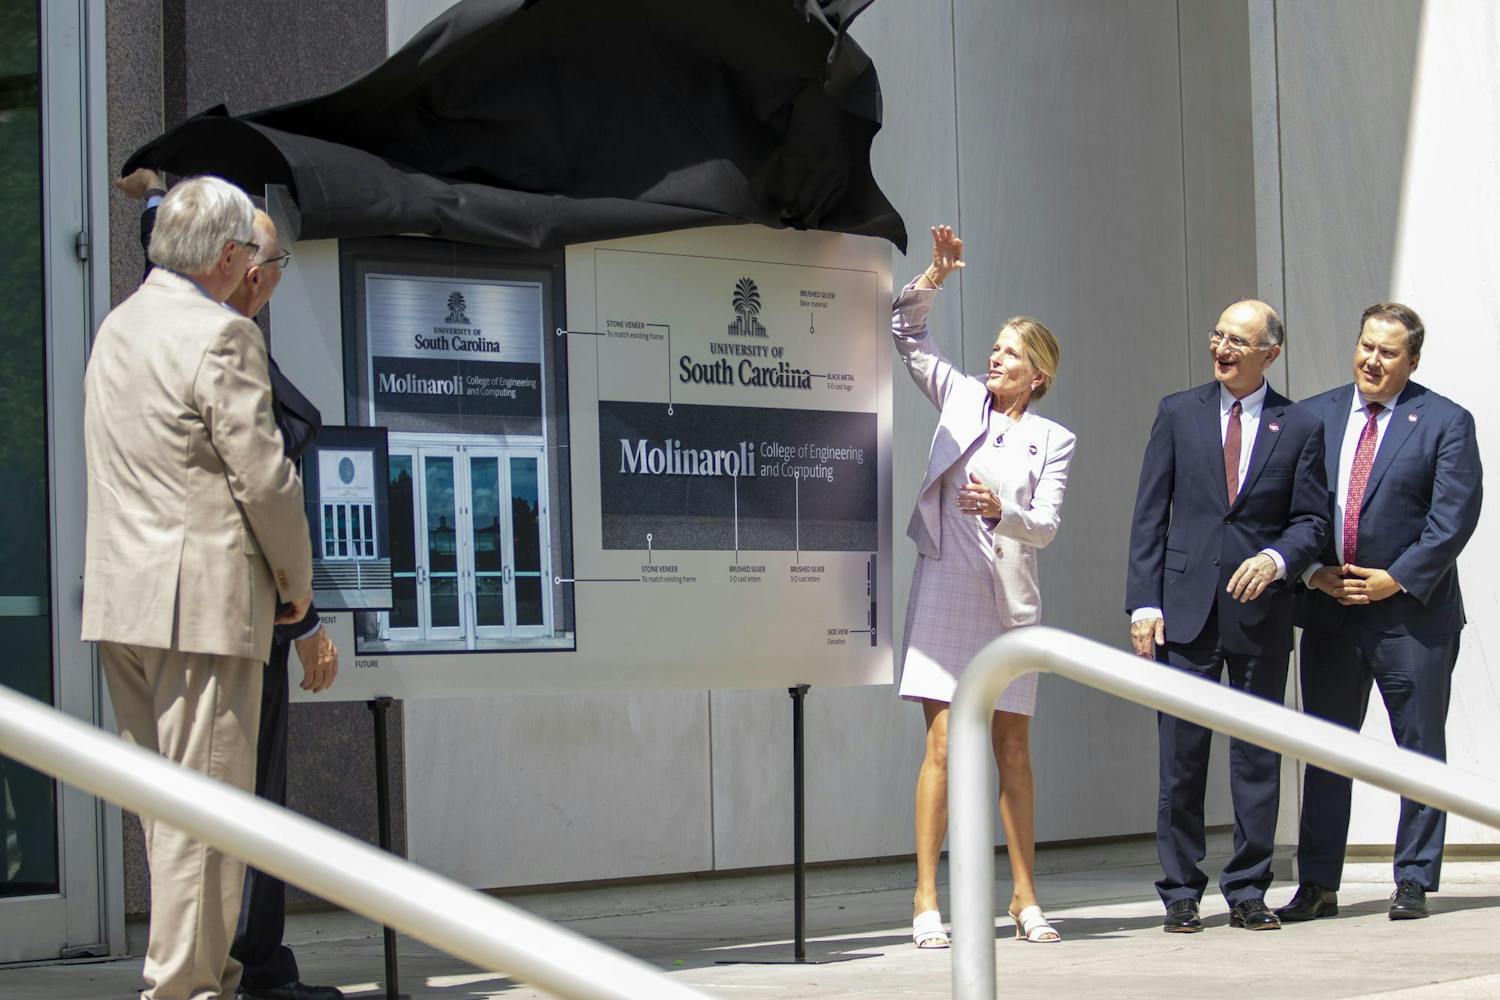 Alex Molinaroli, Kristin Ihle Molinaroli, Michael Amiridis and others unveiled the new name and banner for the USC Molinaroli College of Engineering and Computing on June 6, 2024. The USC Board of Trustees approved a $30 million donation from Alex Molinaroli, a USC alumnus.